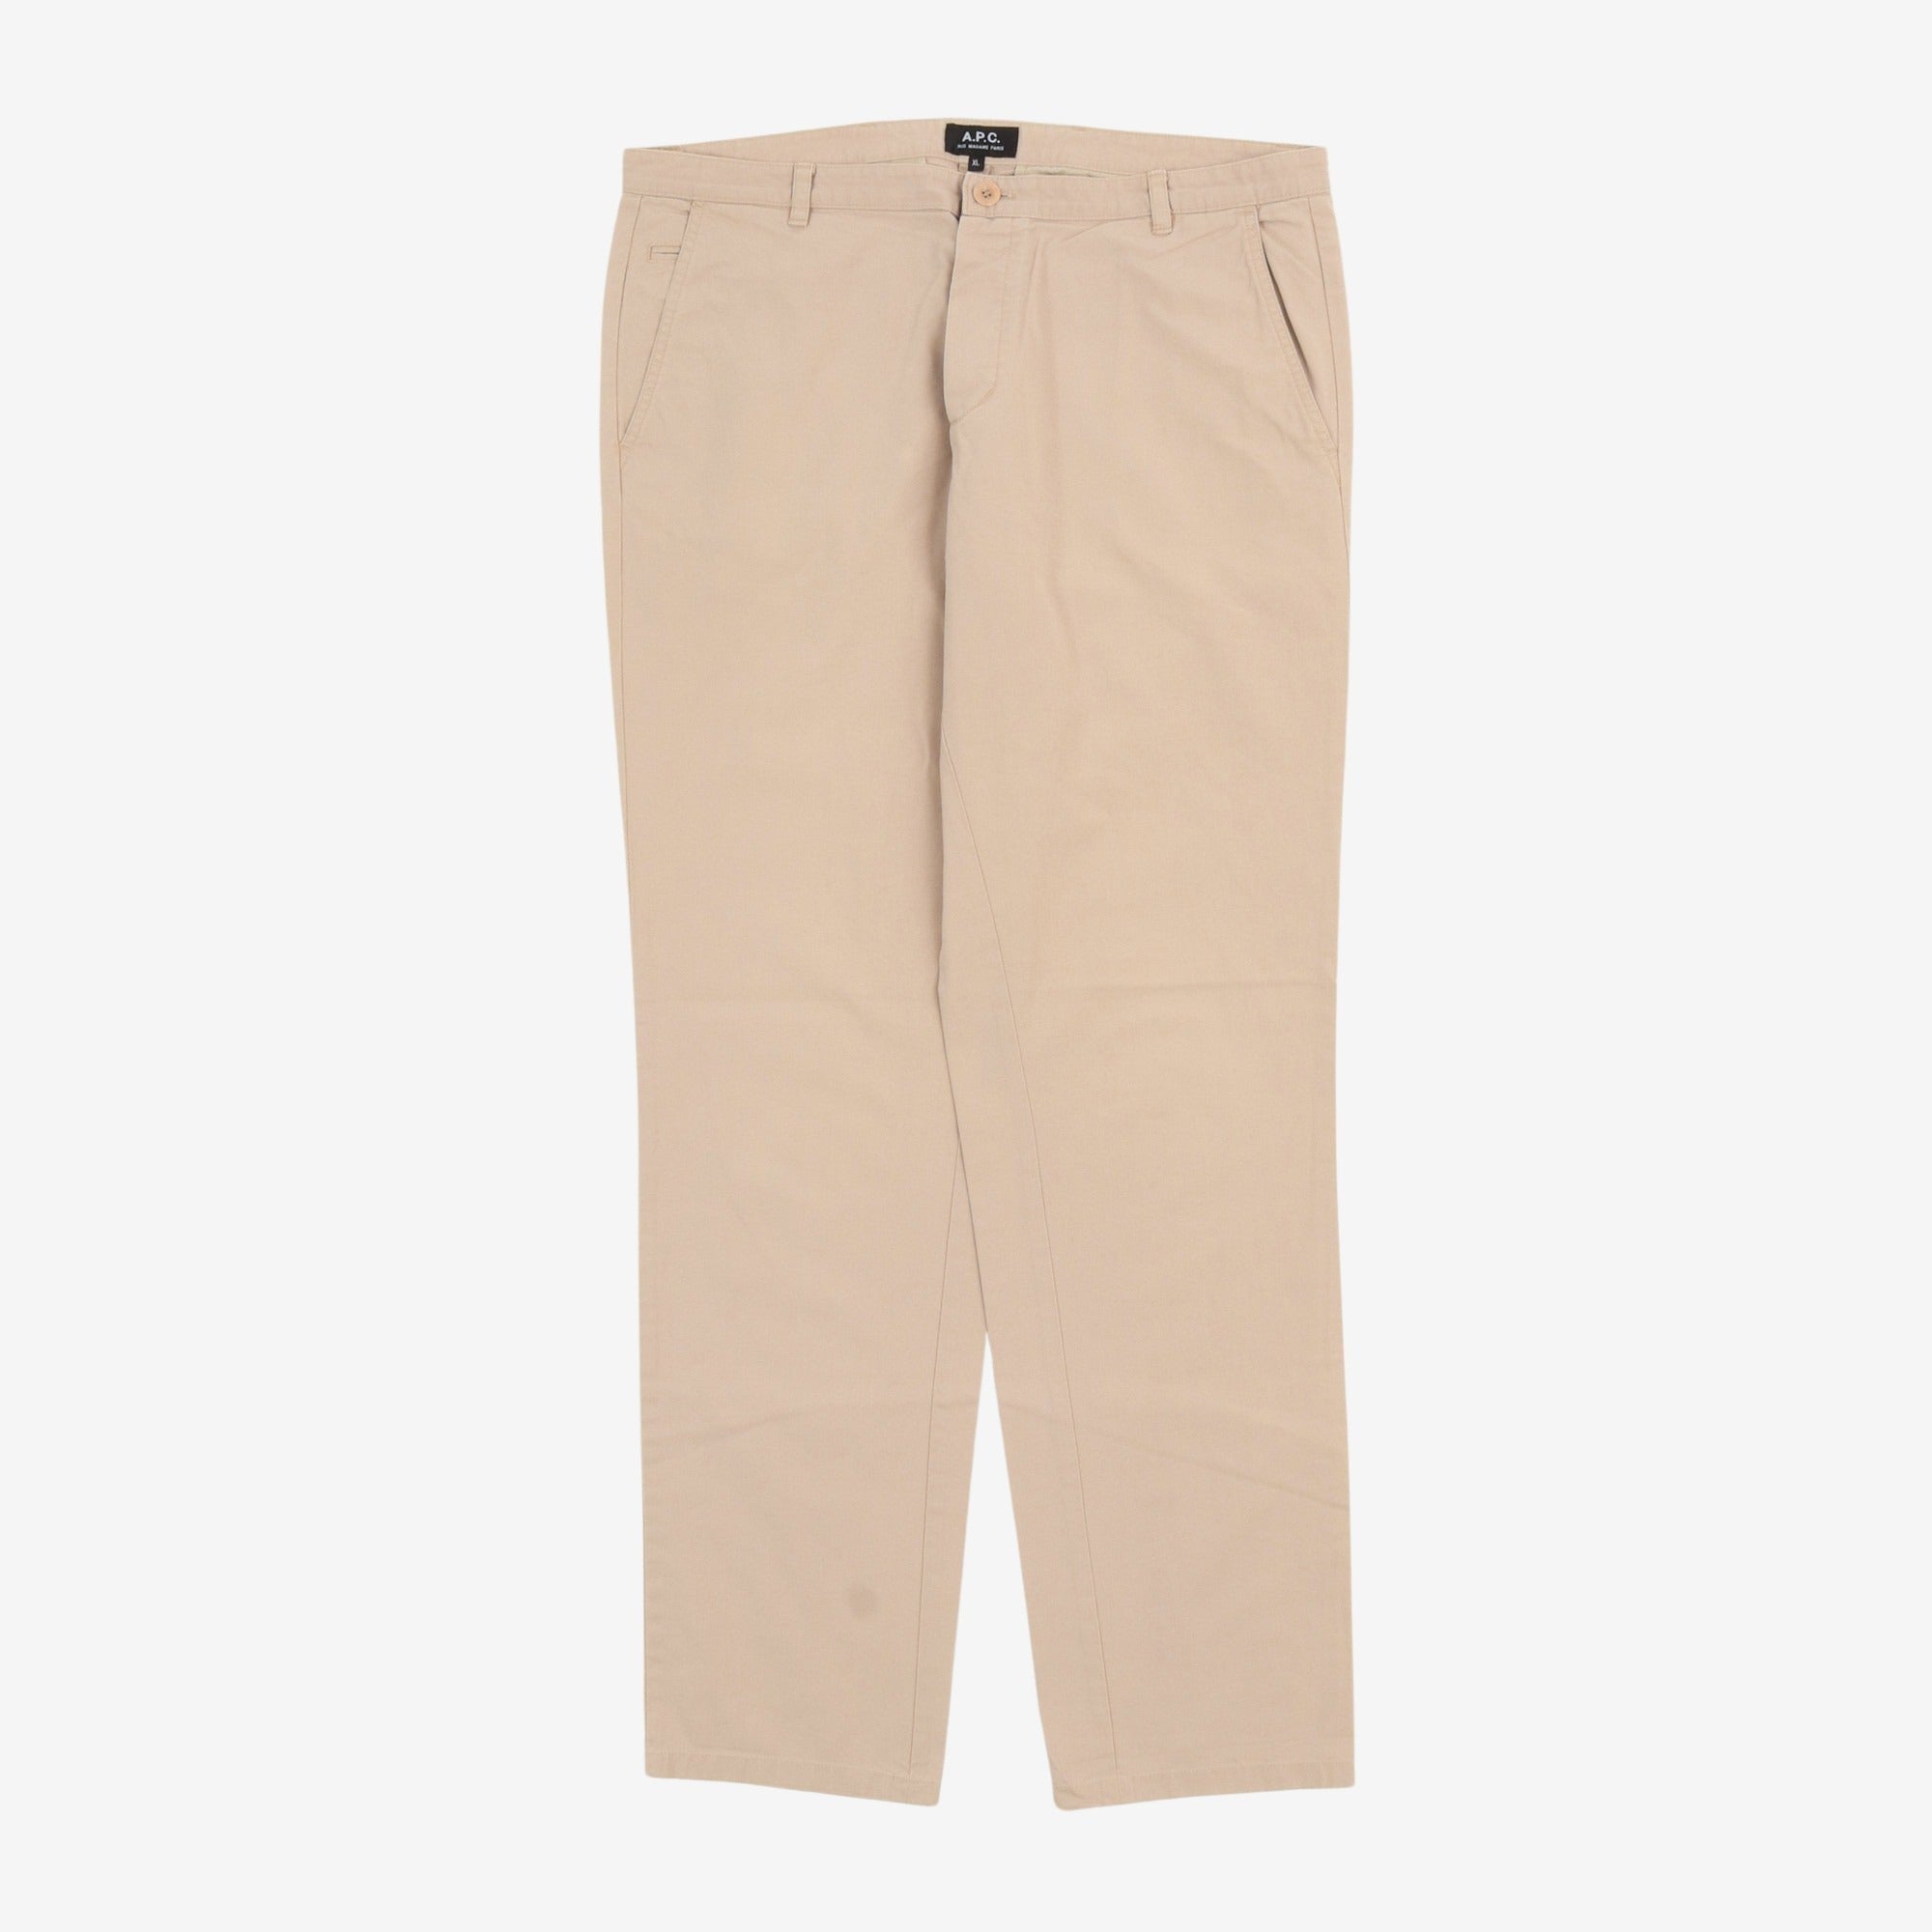 Chino Trousers (37W, 33L)